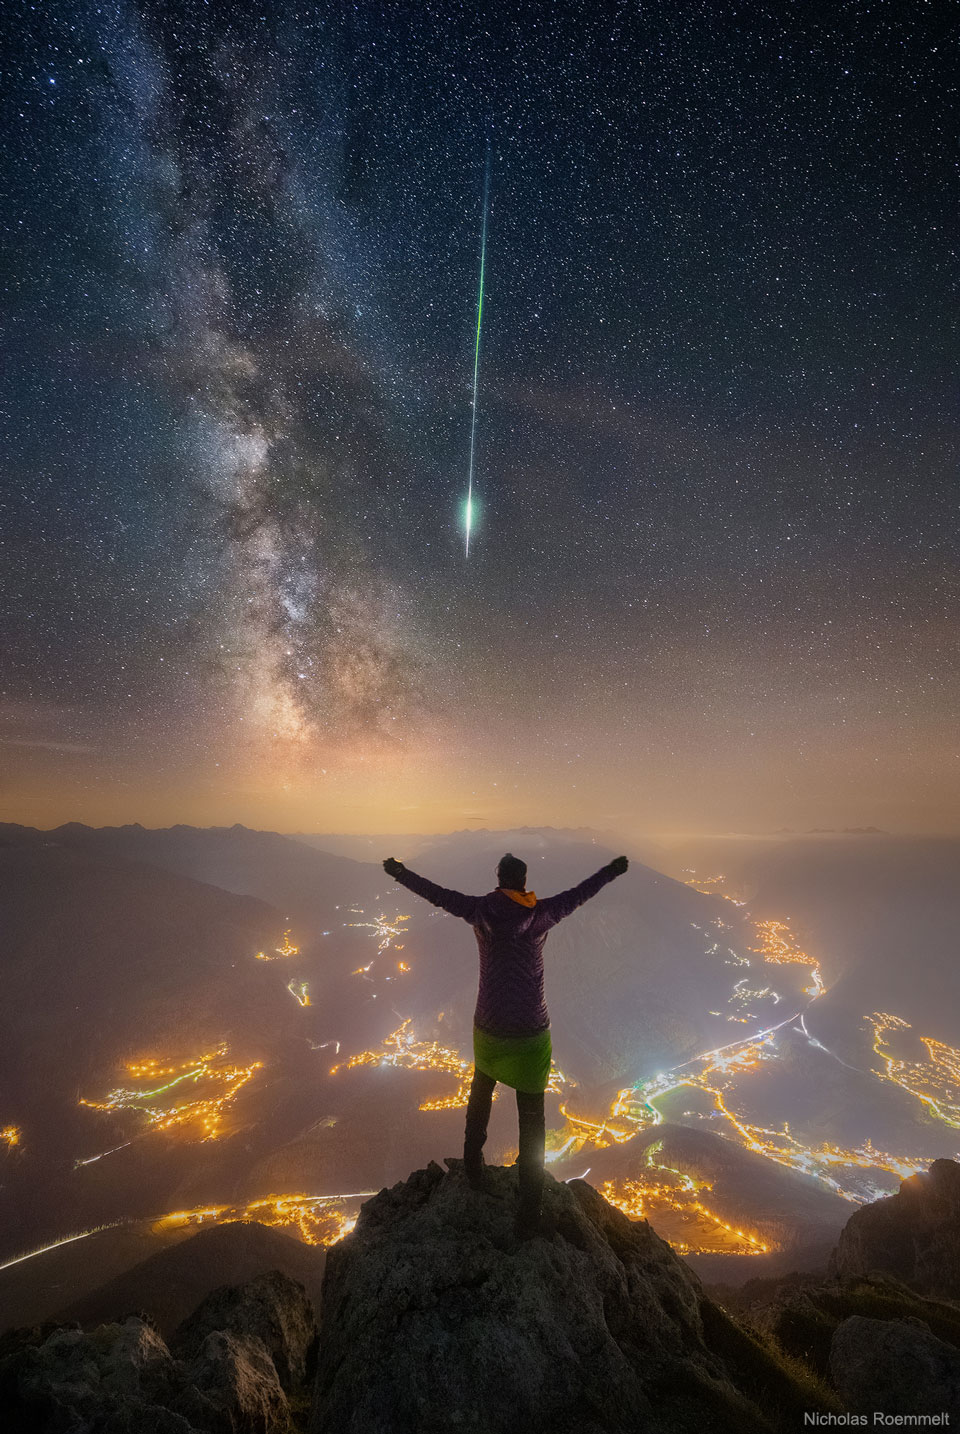 A person is seen facing away, standing on a peak. Other mountain peaks
surround them. City lights are seen in towns and along roads below. Stars
in the night sky are above. The band of the Milky Way galaxy slants down
from the upper left. A bright green meteor streak slants down from above.
Please see the explanation for more detailed information.